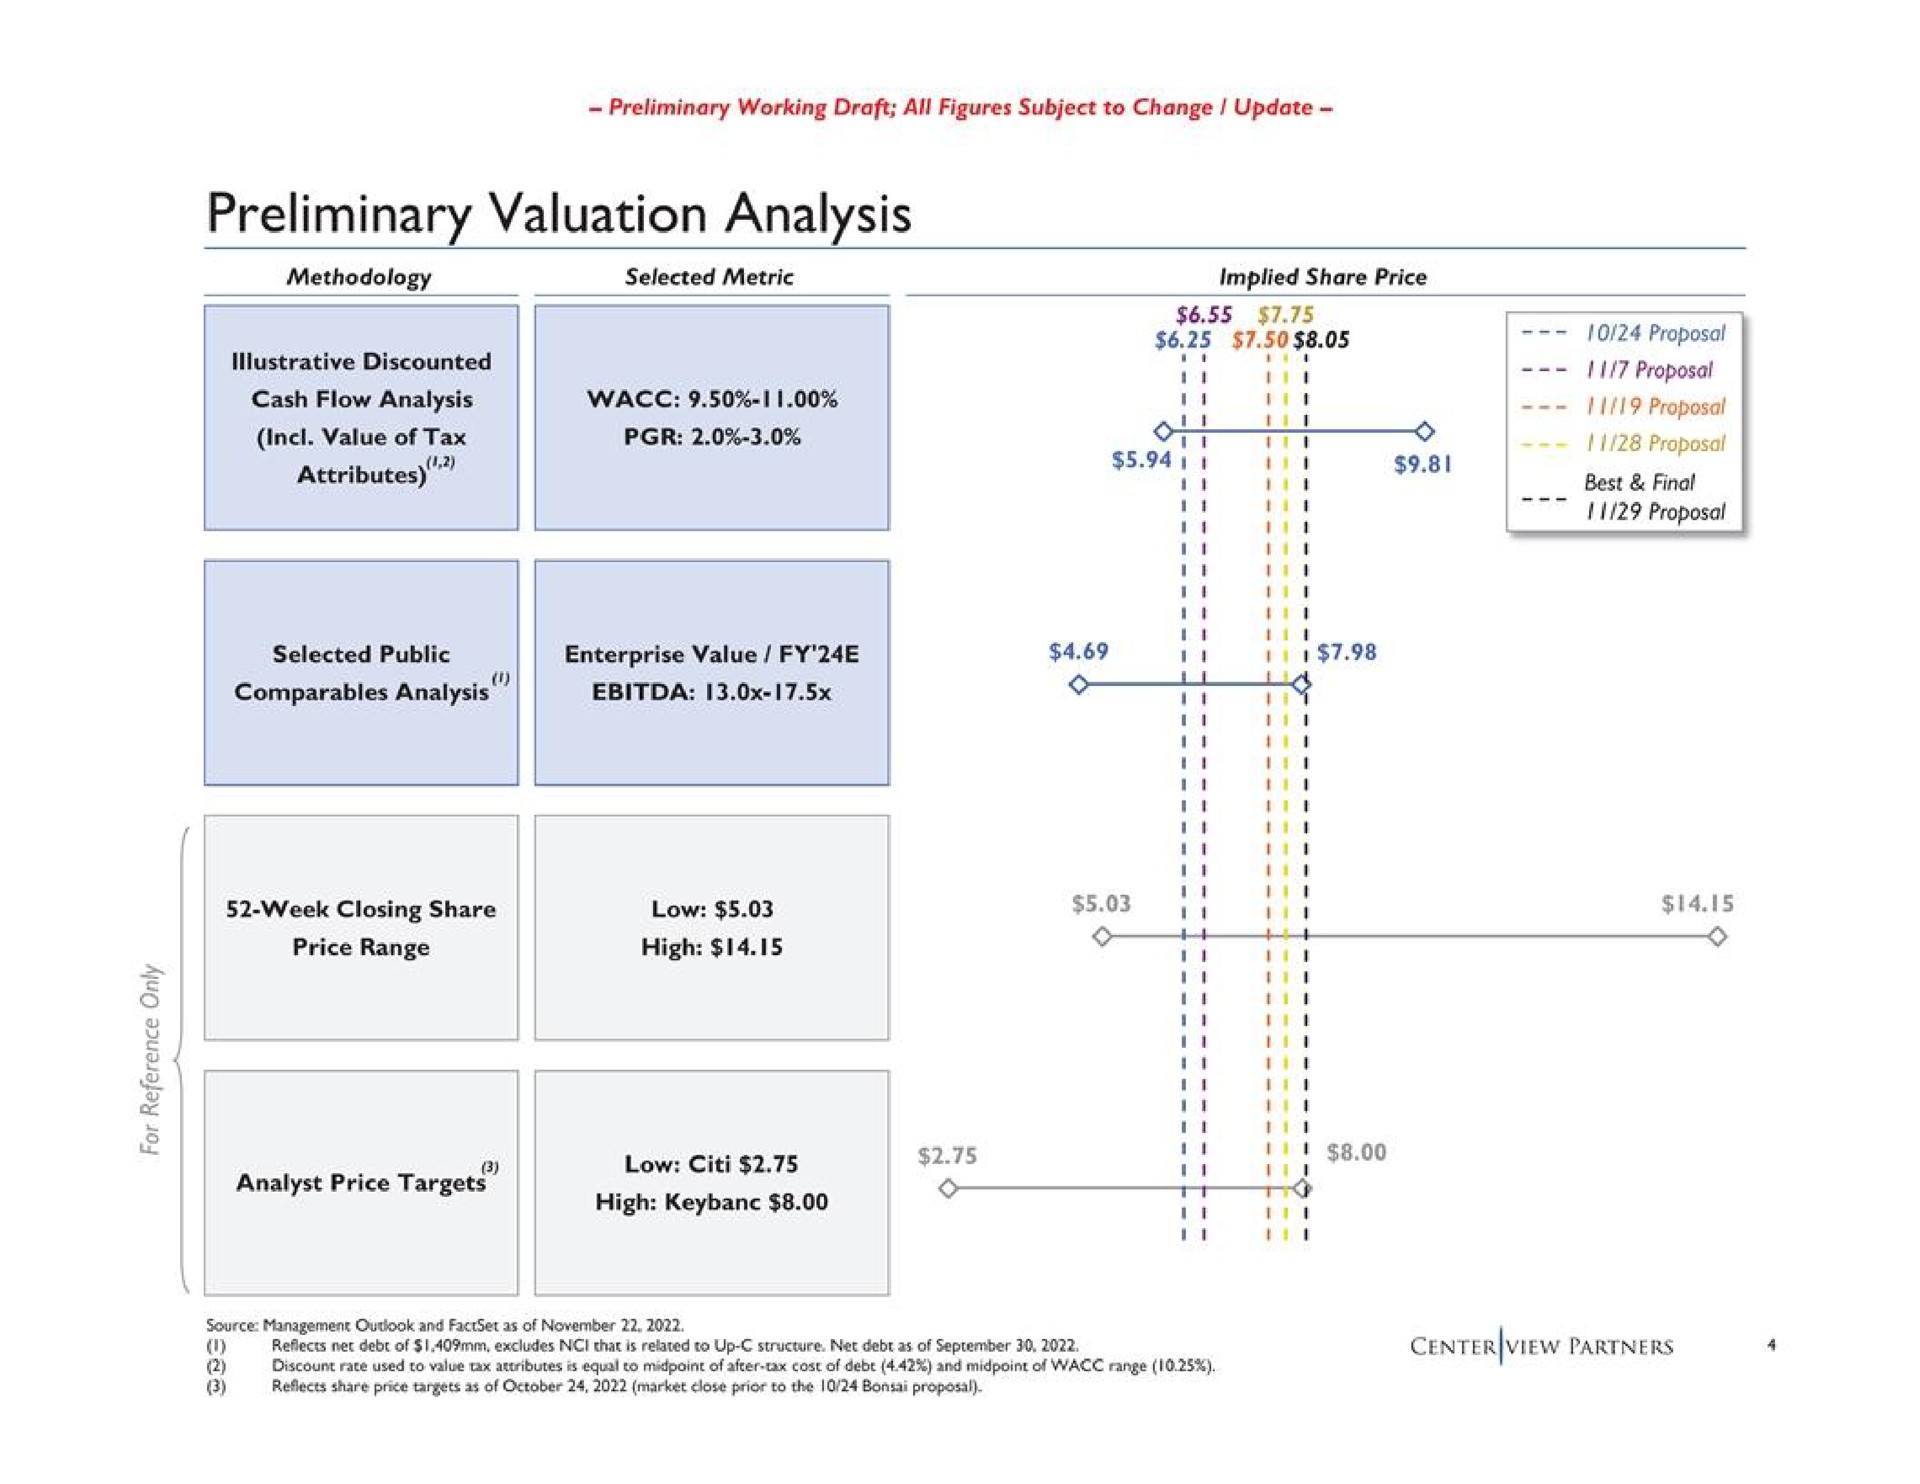 preliminary valuation analysis analysis a | Centerview Partners